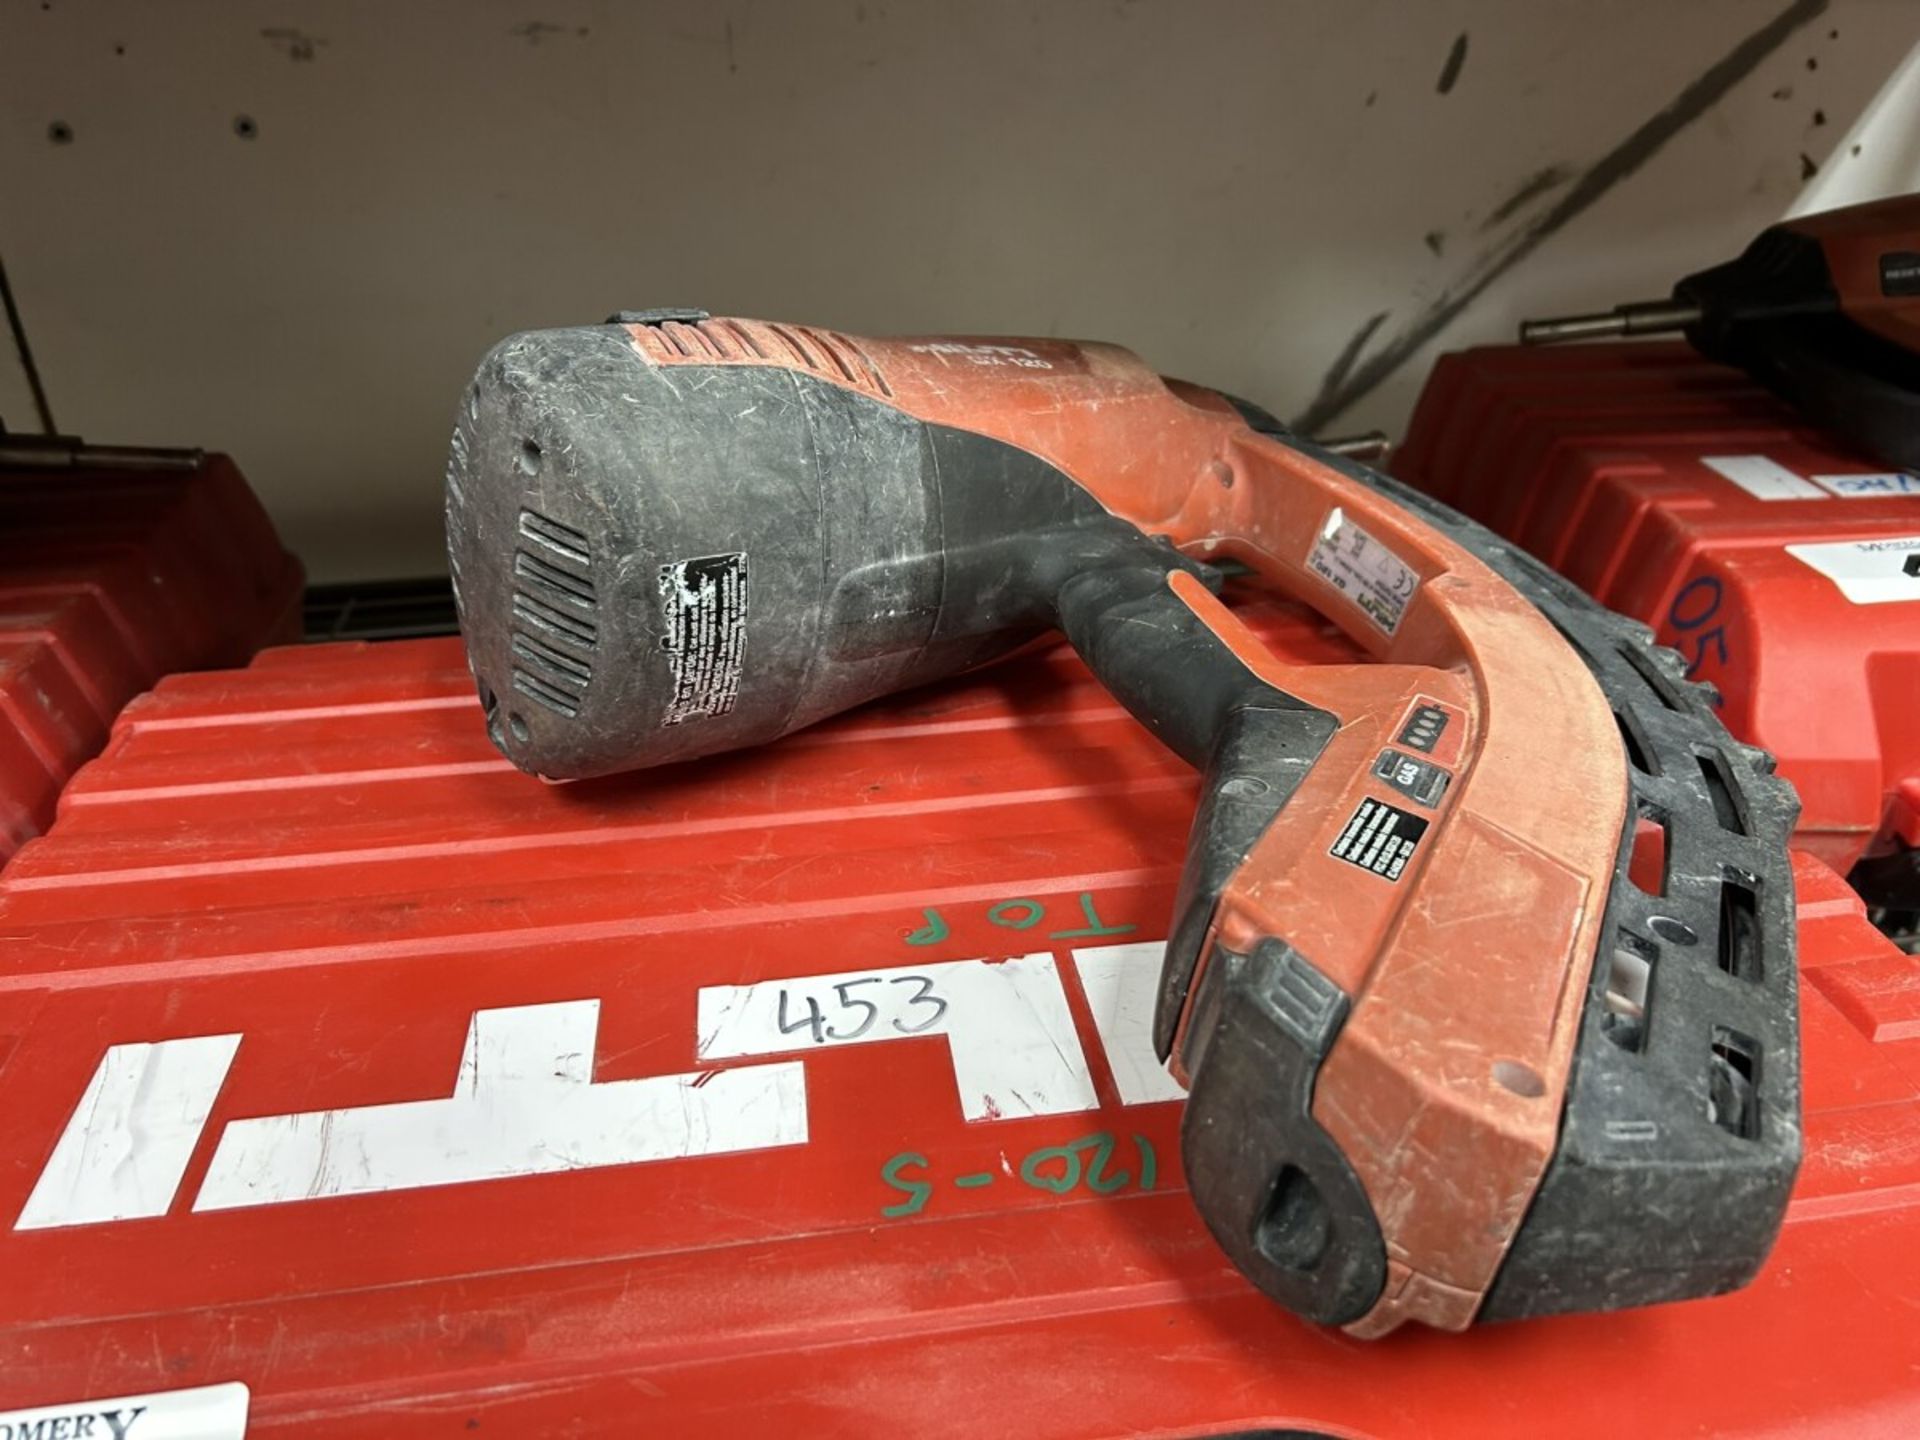 HILTI GX 120 GAS-ACTUATED FASTENING TOOL GAS NAILER WITH SINGLE POWER SOURCE FOR DRYWALL TRACK, - Image 4 of 5